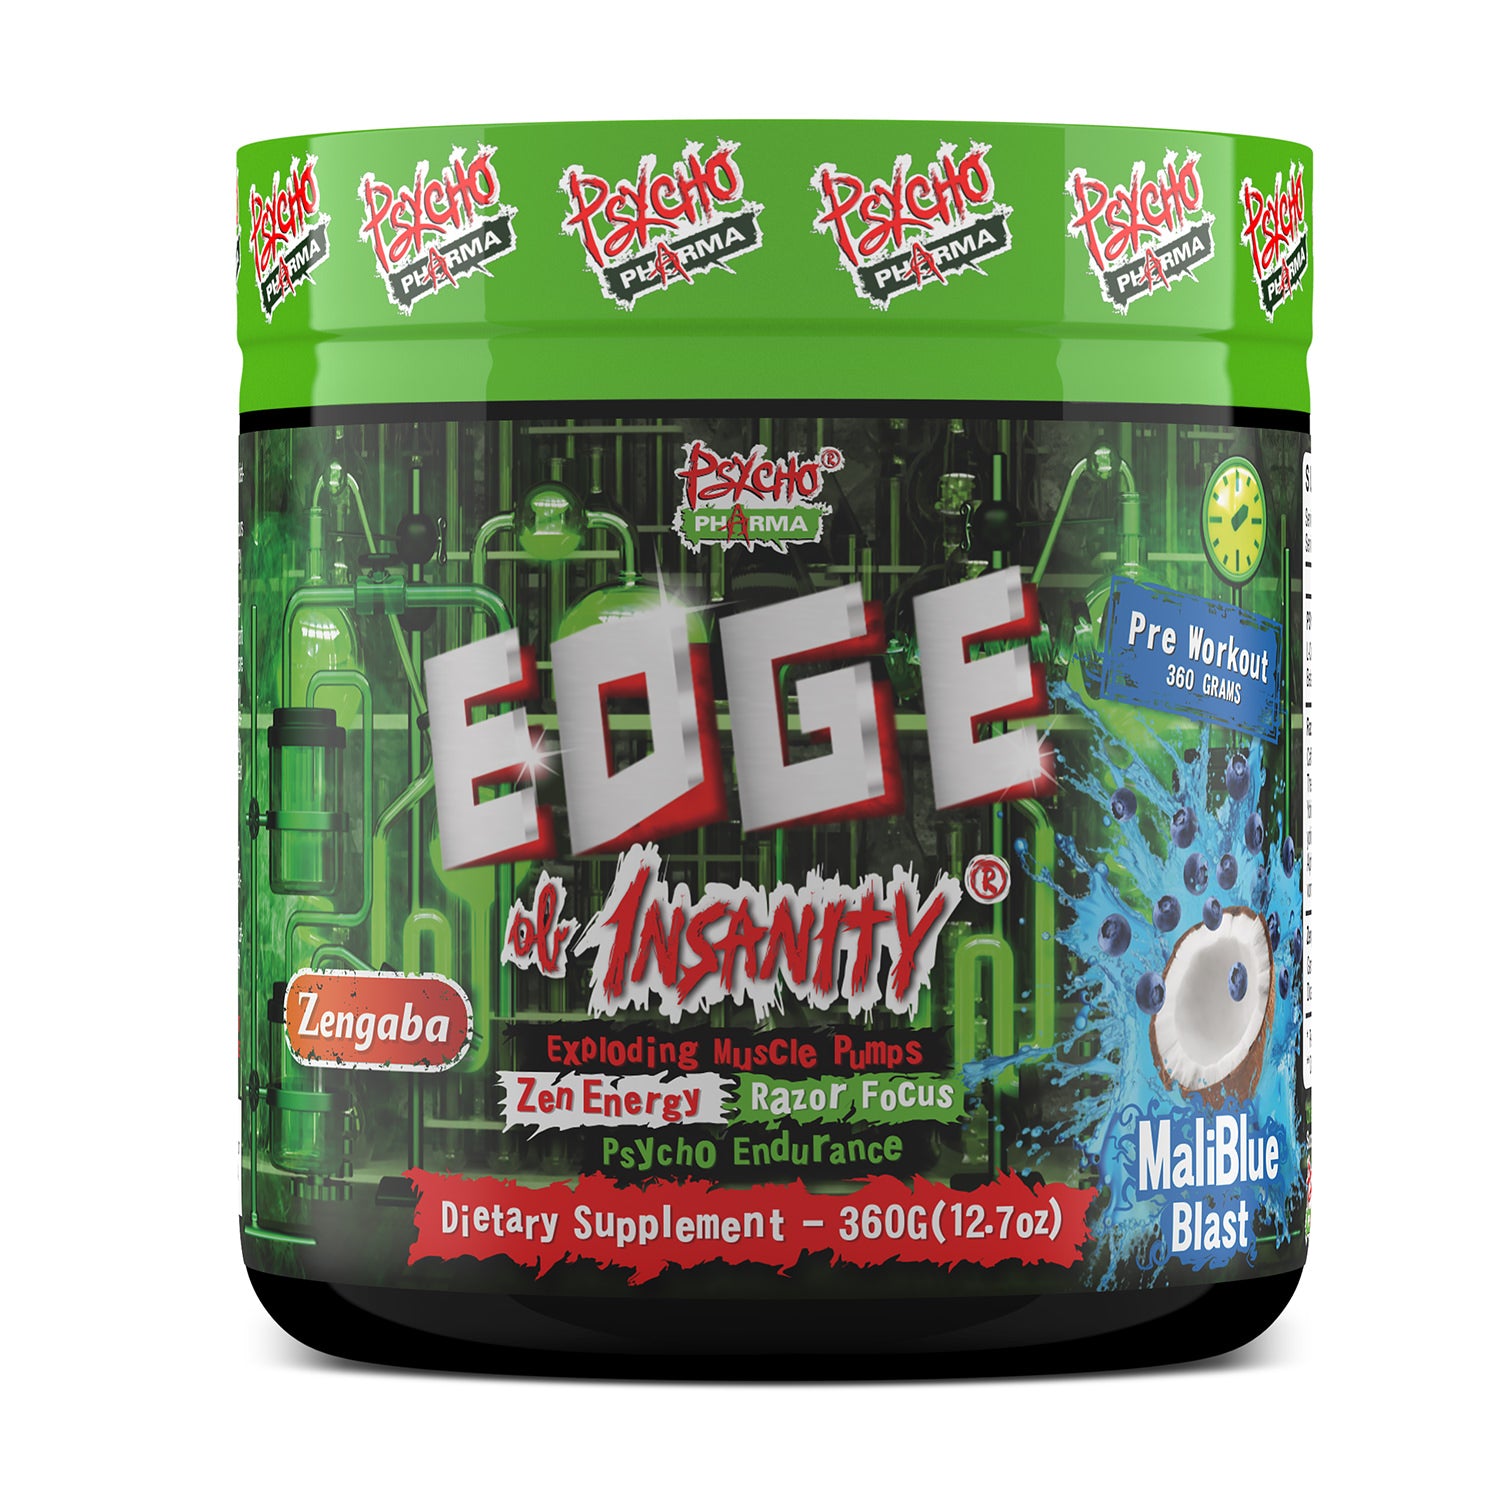 Psycho Pharma Edge Of Insanity - A1 Supplements Store